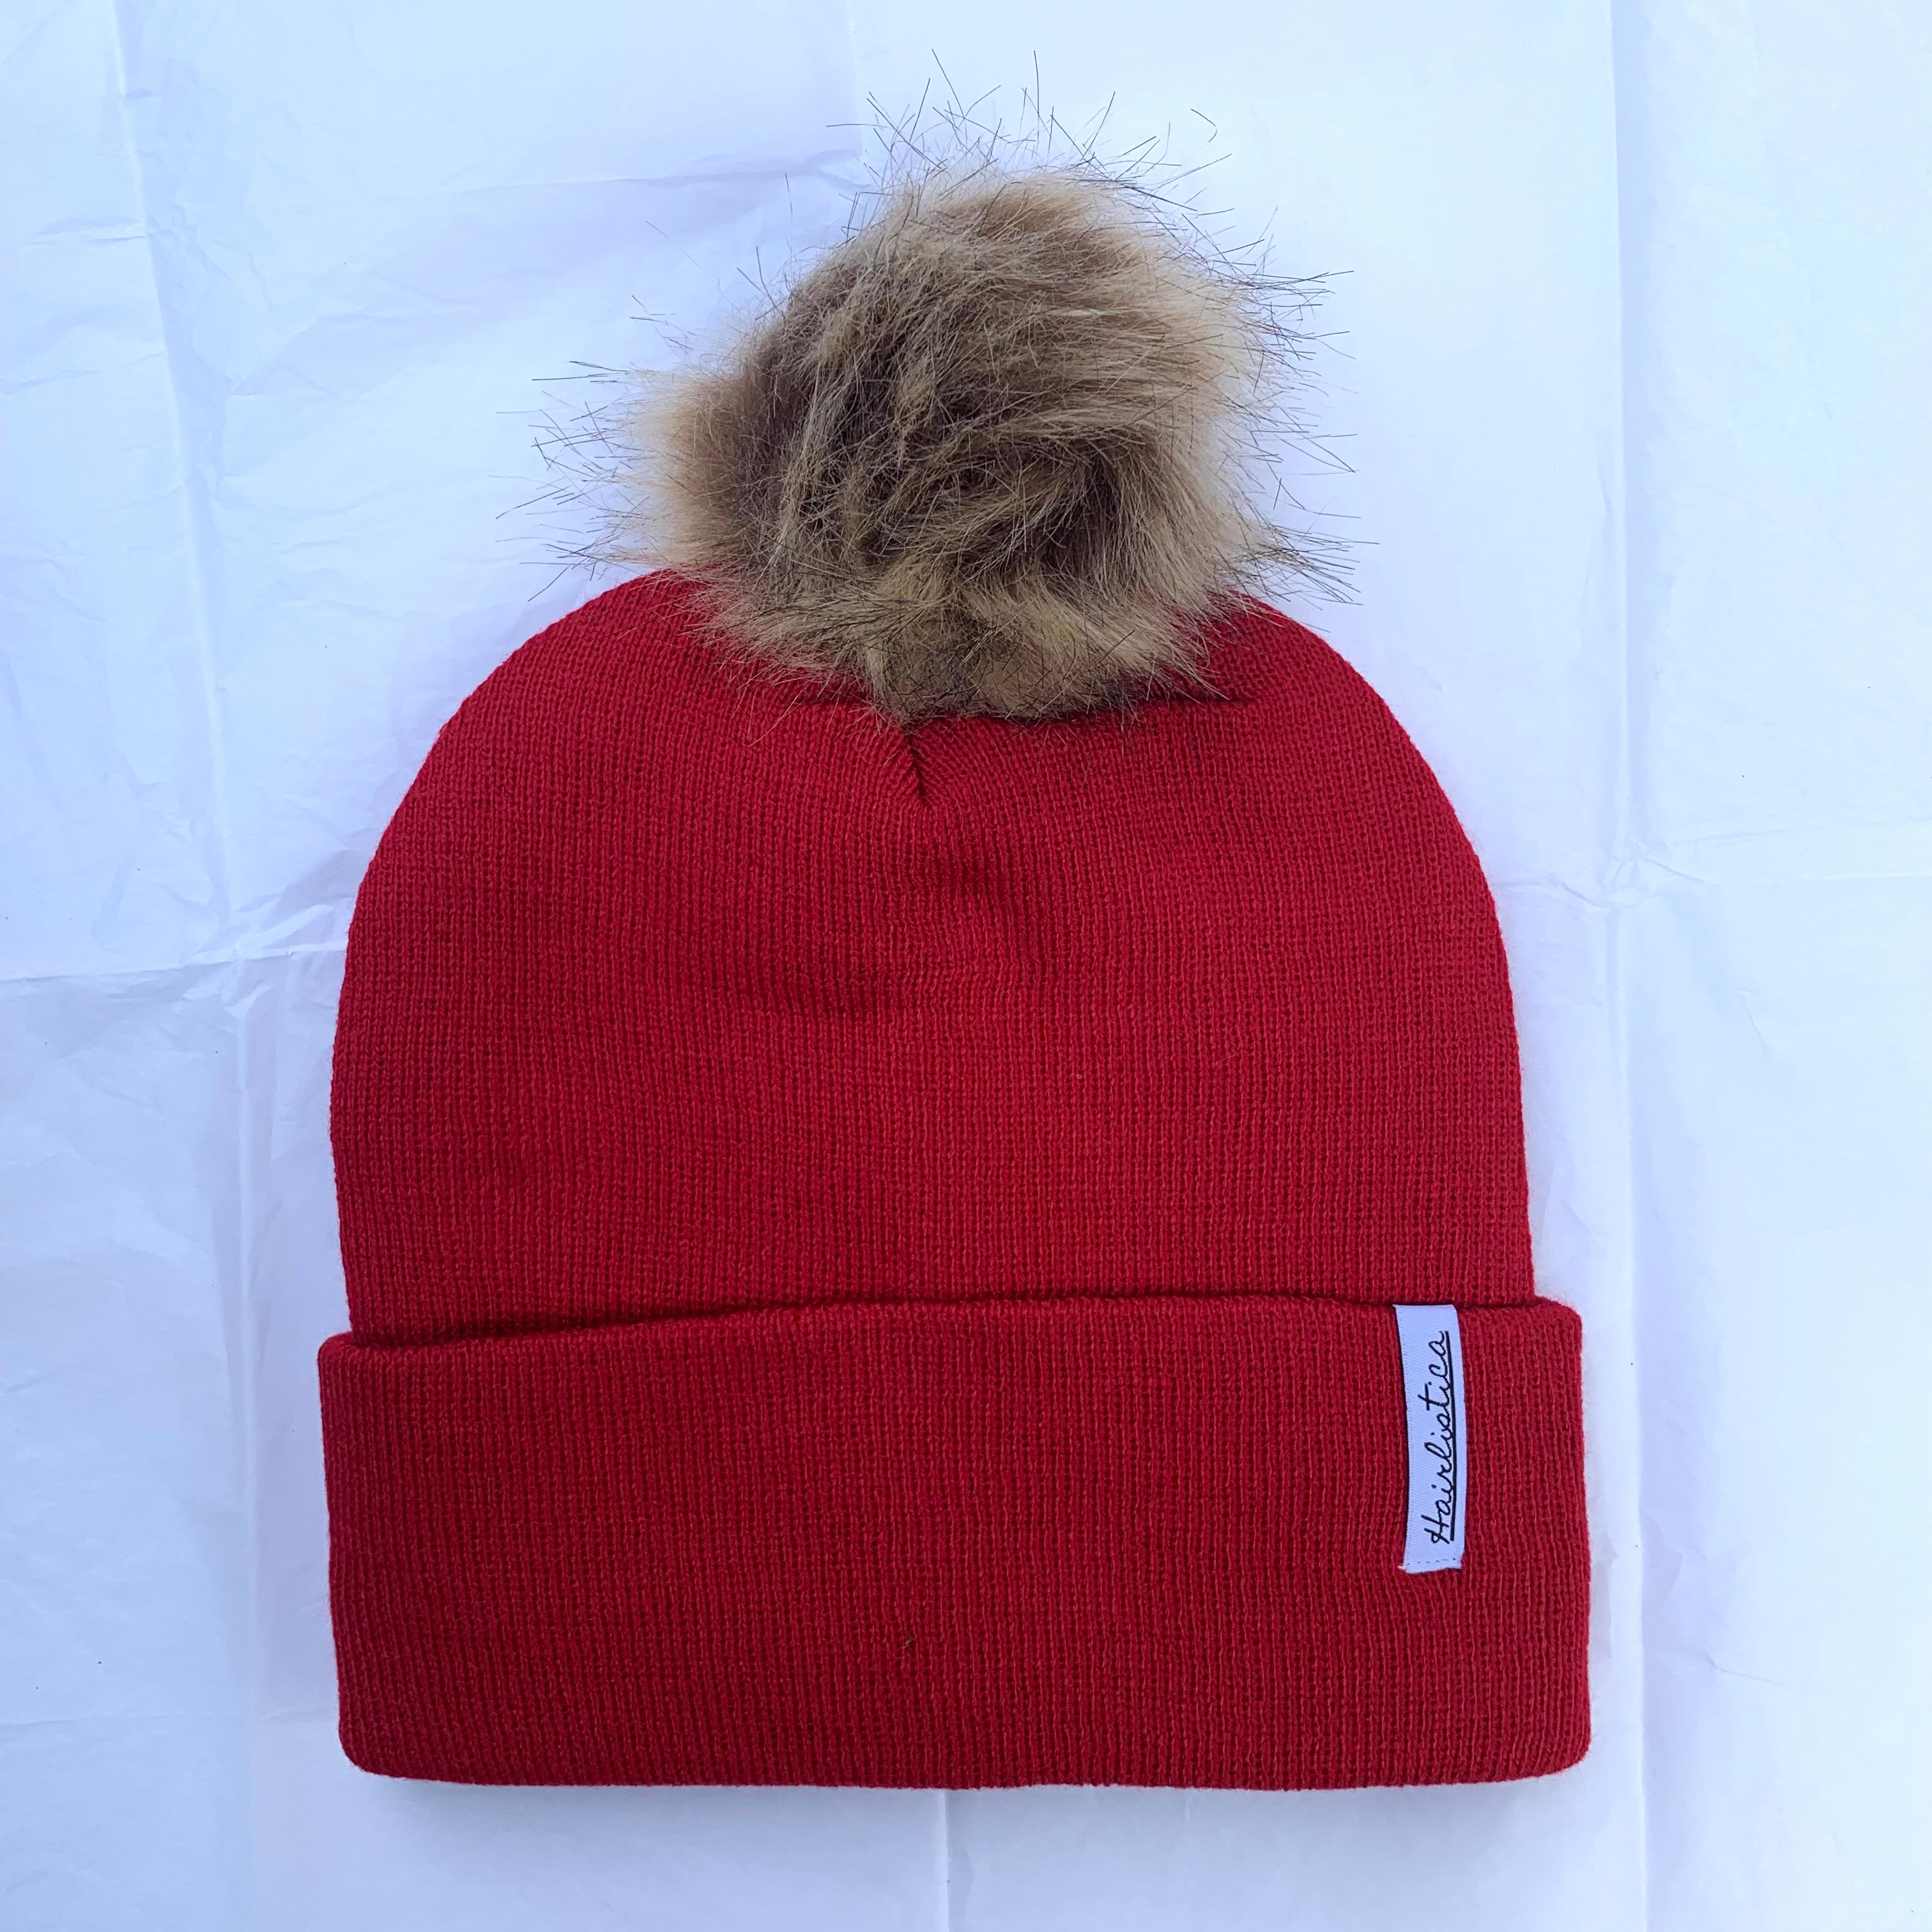 Satin lined beanie - Red with Pompom